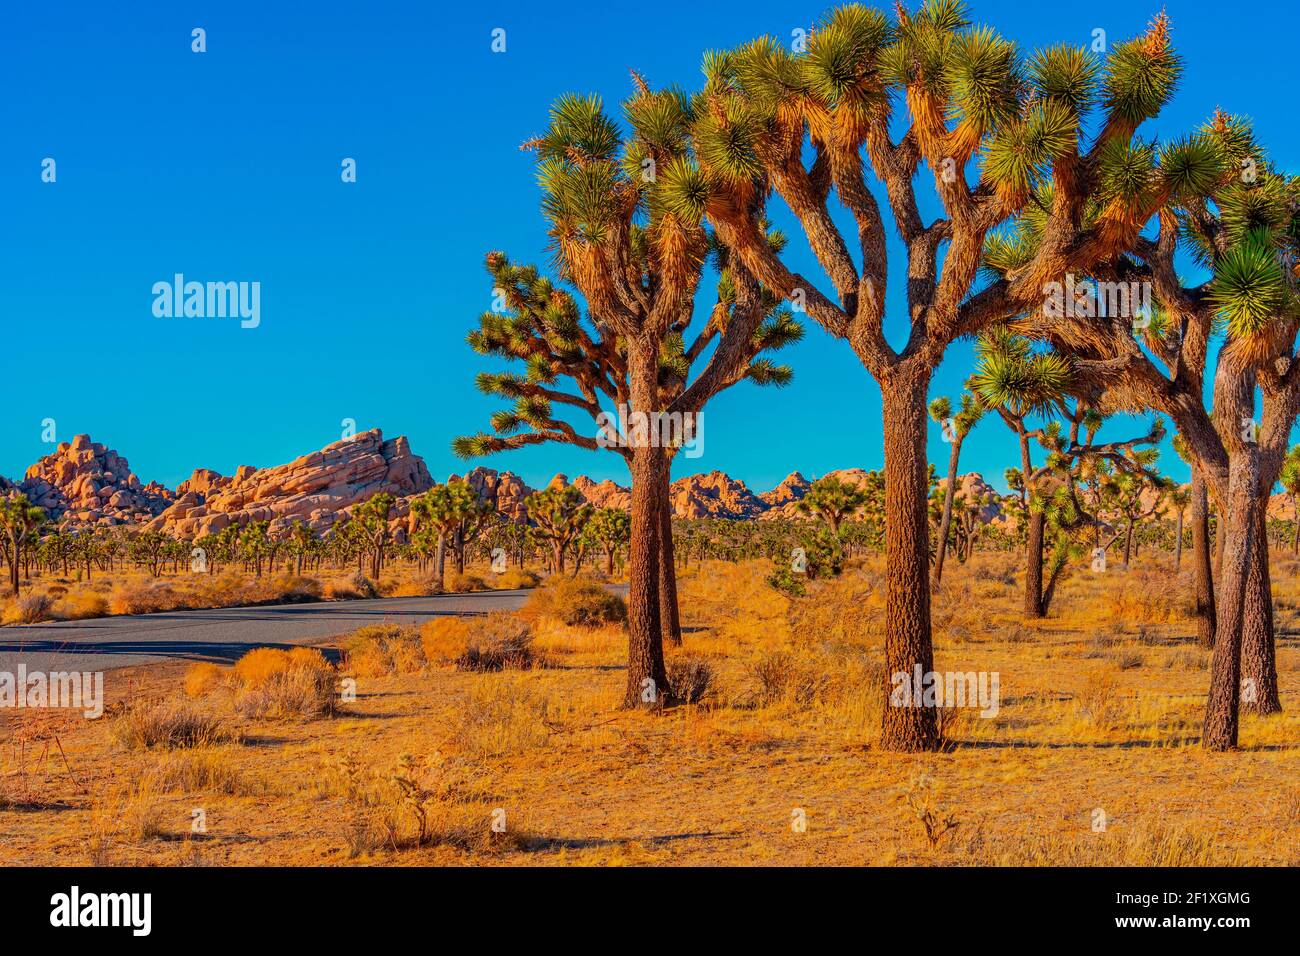 Joshua Trees line a road in Joshua Tree National Park. The trees are part of the Yucca family. Stock Photo